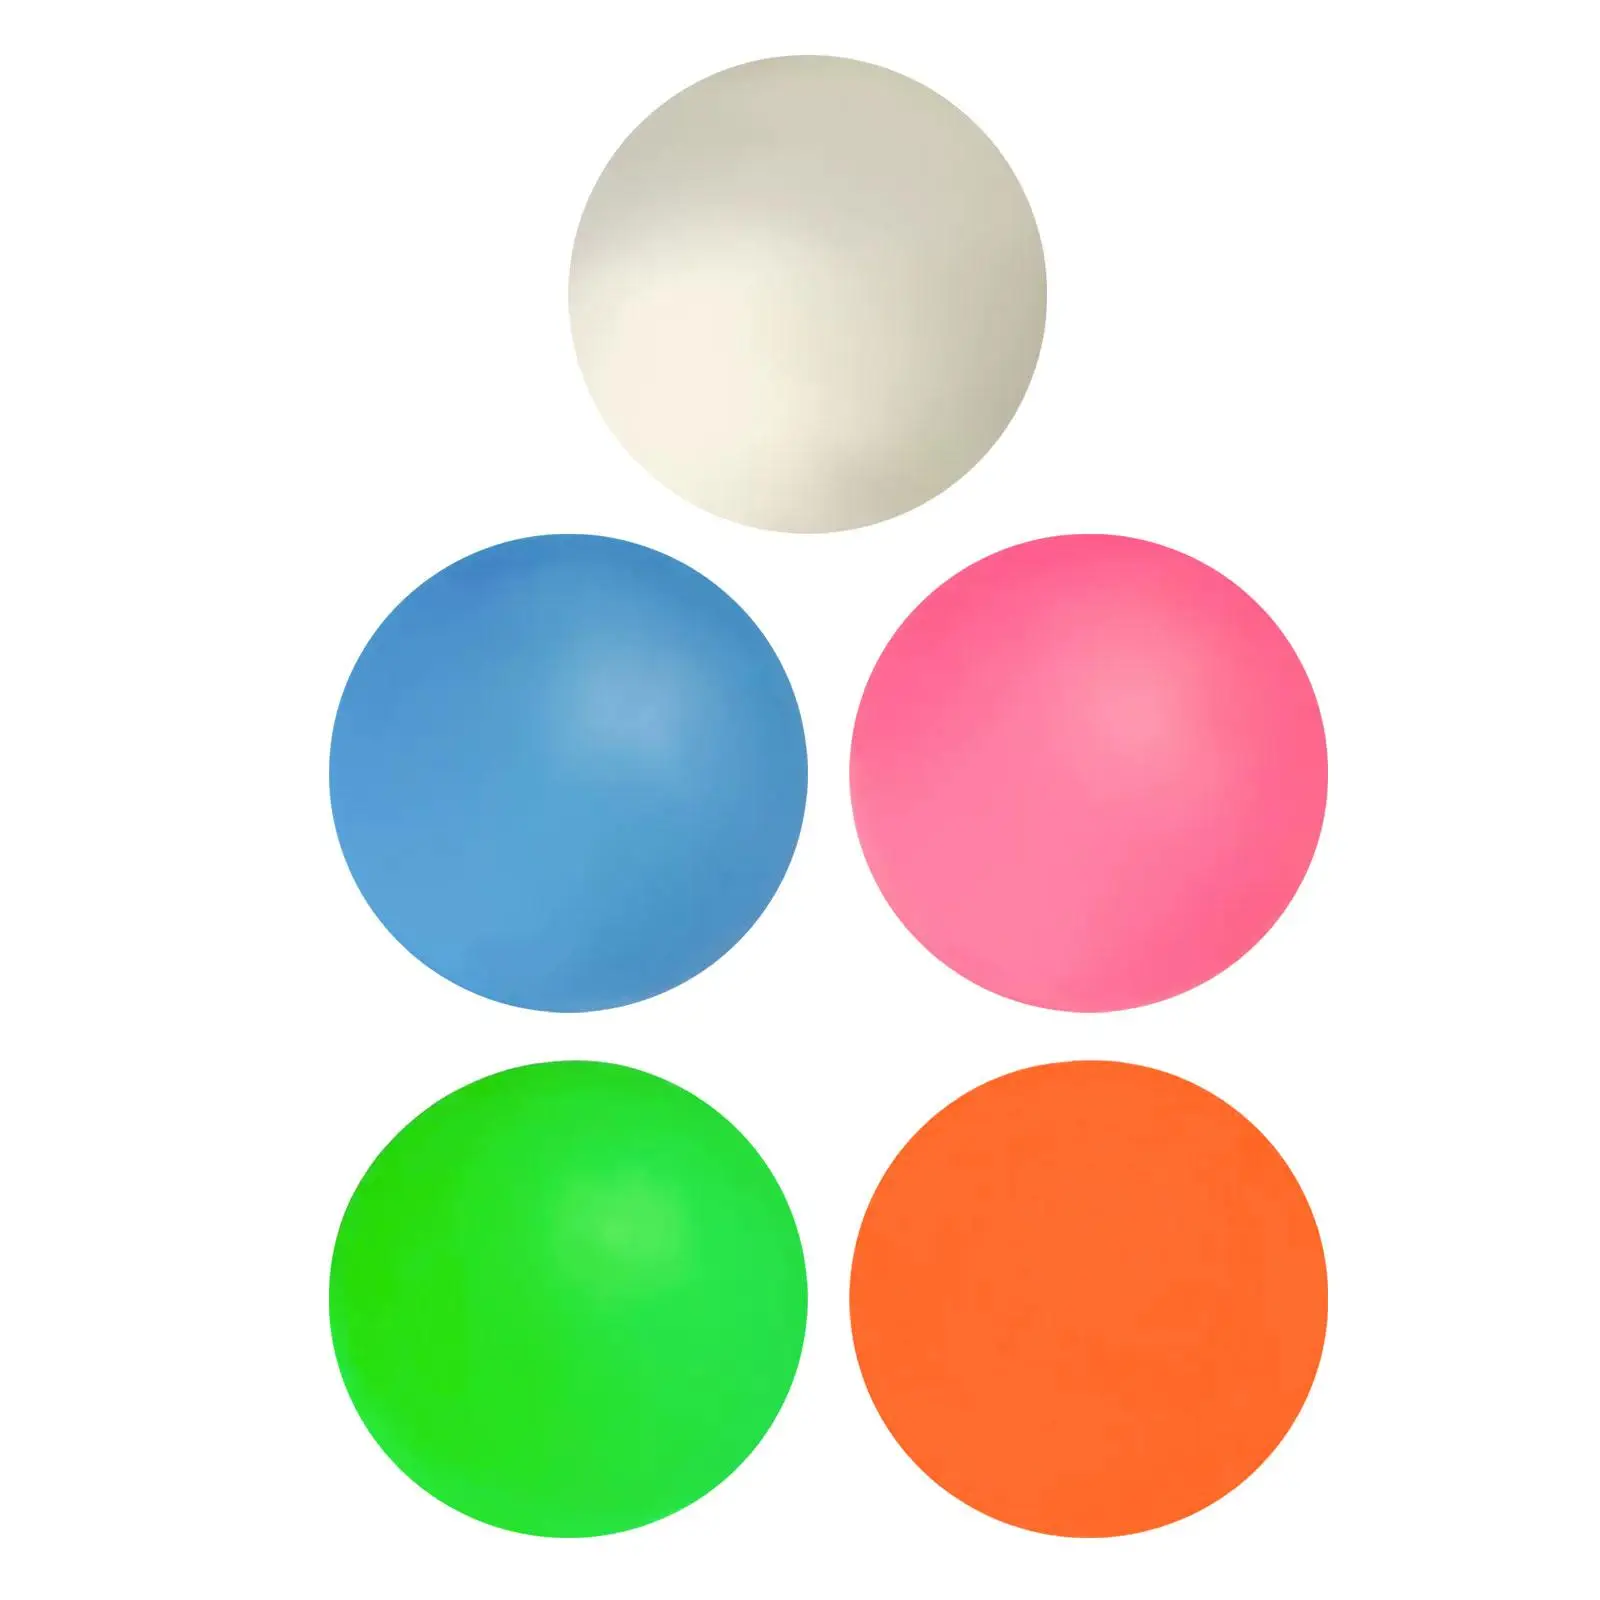 

Stretch Balls Toys Small Hand Grip Pressure Ball Soft Fidget Sensory Toy Novelty Relaxing Balls Toy for Gifts Goodie Bag Filler